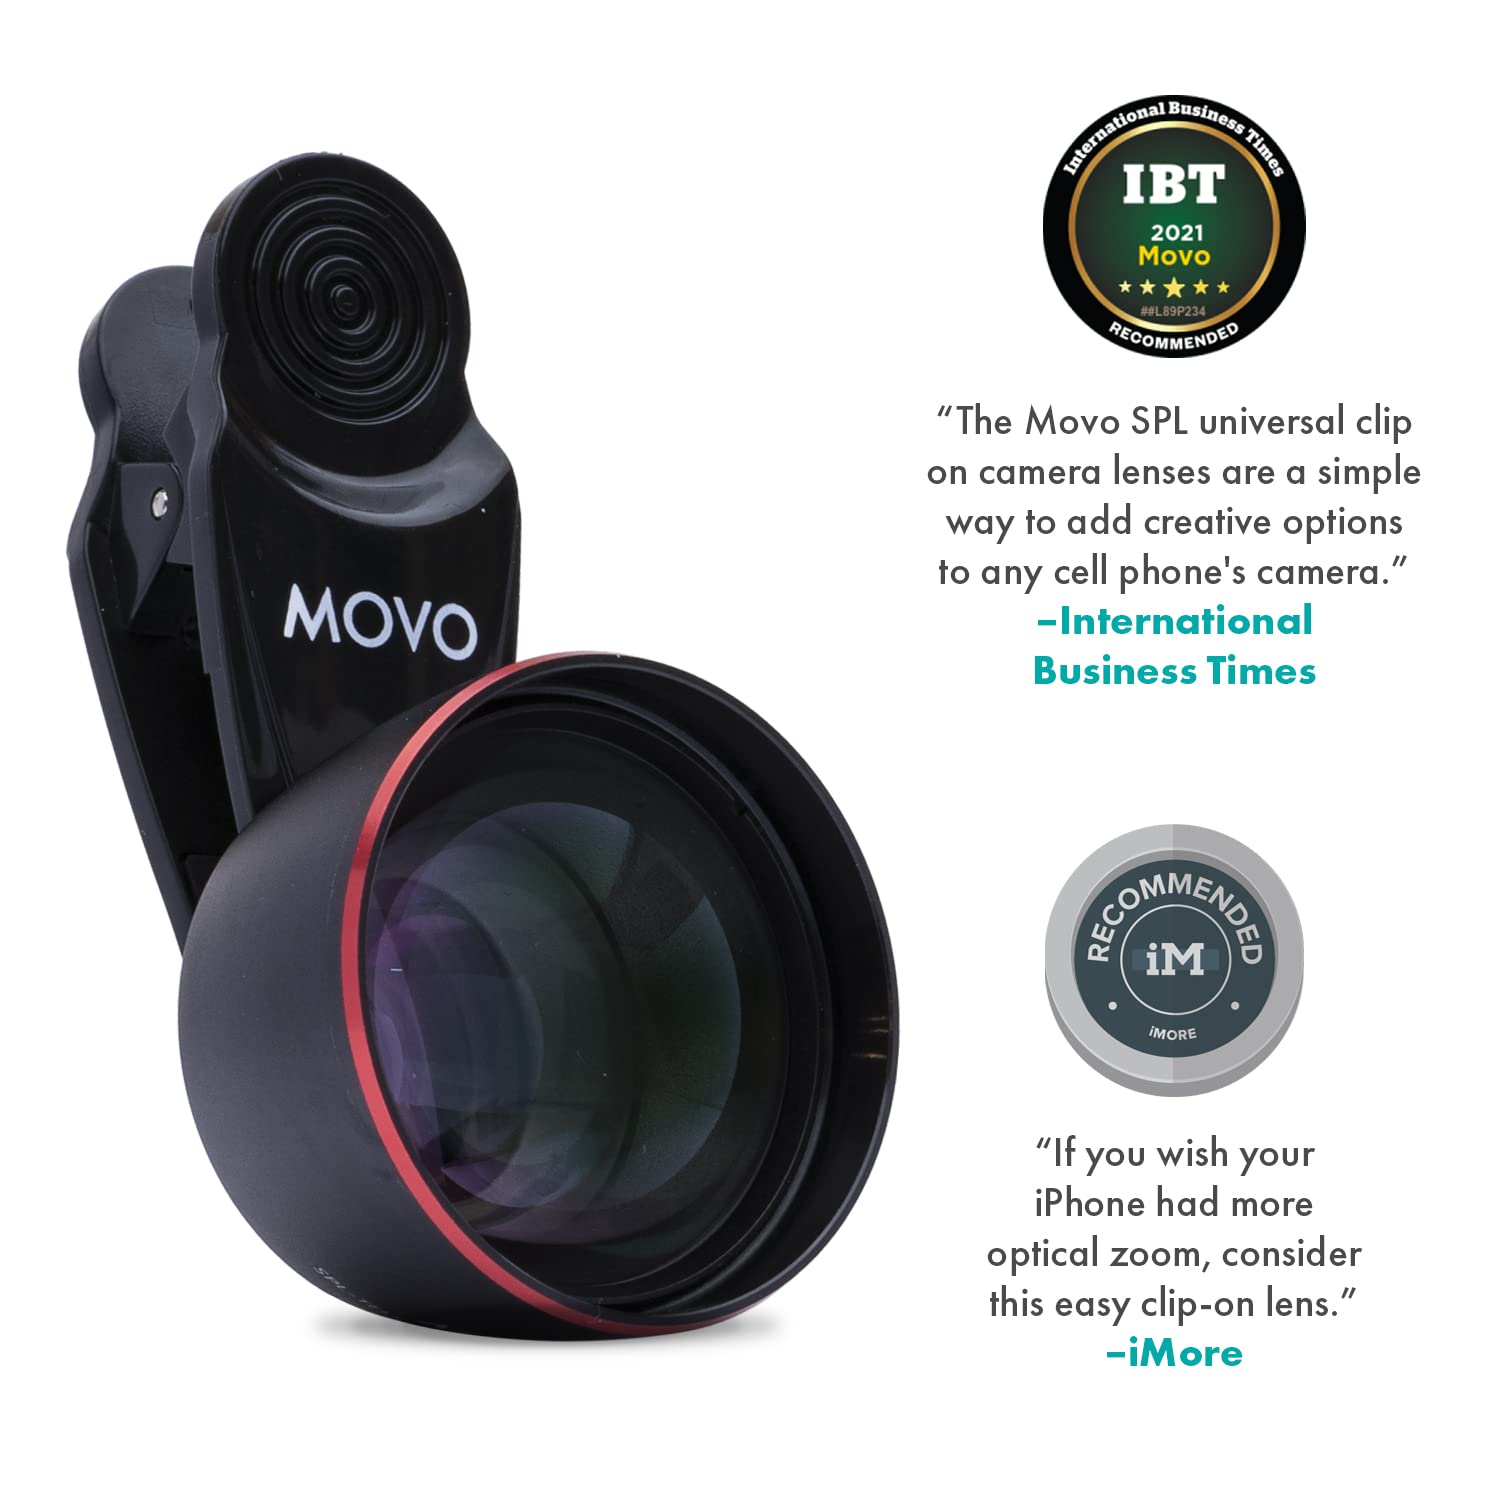 Movo SPL-Tele 3X Telephoto Lens with Clip Mount for Smartphones - Zoom Lens for iPhone, Android, and Tablets - Smartphone Telescopic Lens for Video and Photography - Best Telephoto Lens for iPhone  - Good